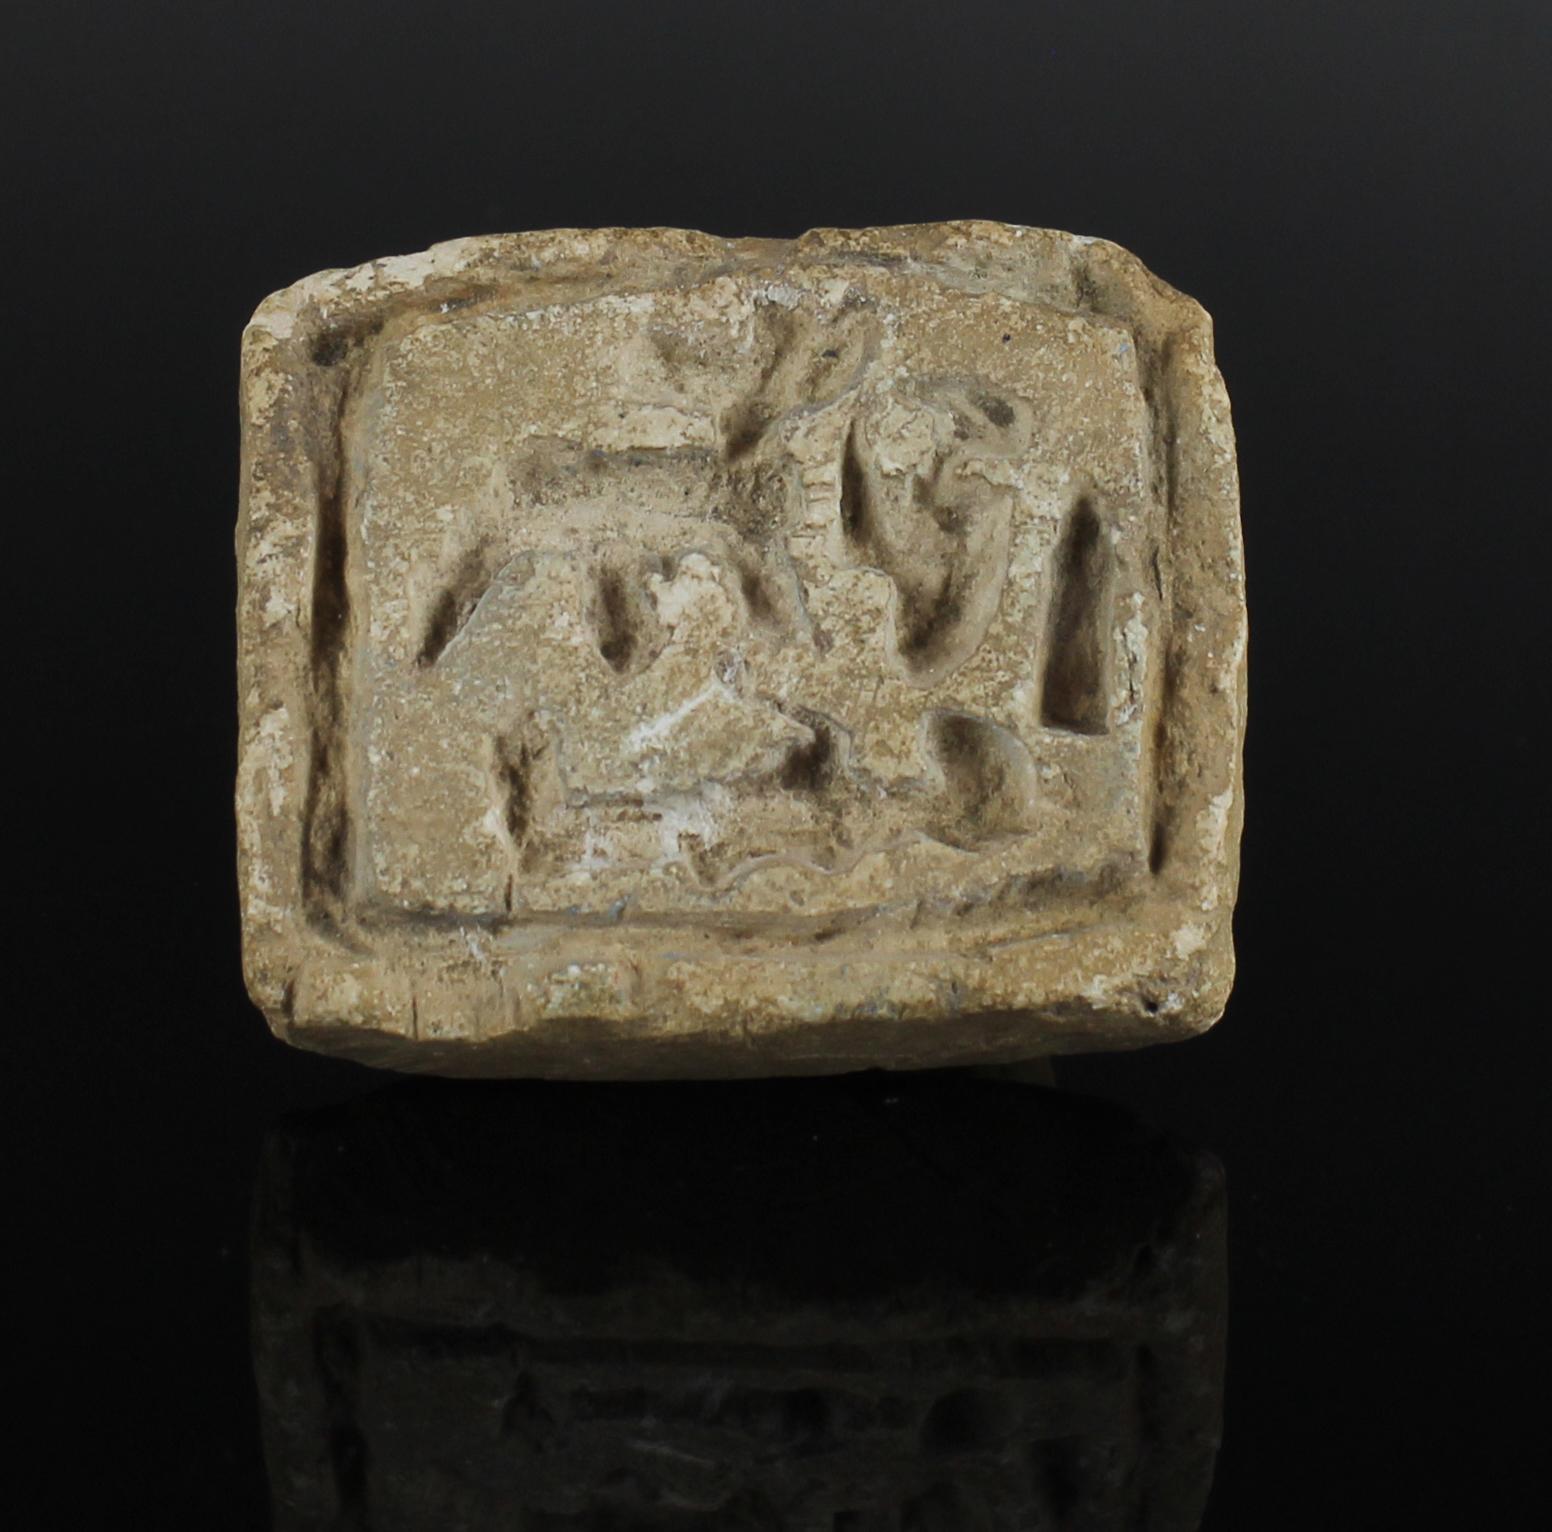 ITEM: Seal with Ptah, Anubis and vulture
MATERIAL: Stone
CULTURE: Egyptian
PERIOD: Middle Kingdom, 2040 – 1782 B.C
DIMENSIONS: 39 mm x 45 mm x 32 mm
CONDITION: Good condition
PROVENANCE: Ex Museum Exhibiton of the Arbeitsgruppe für Biblische